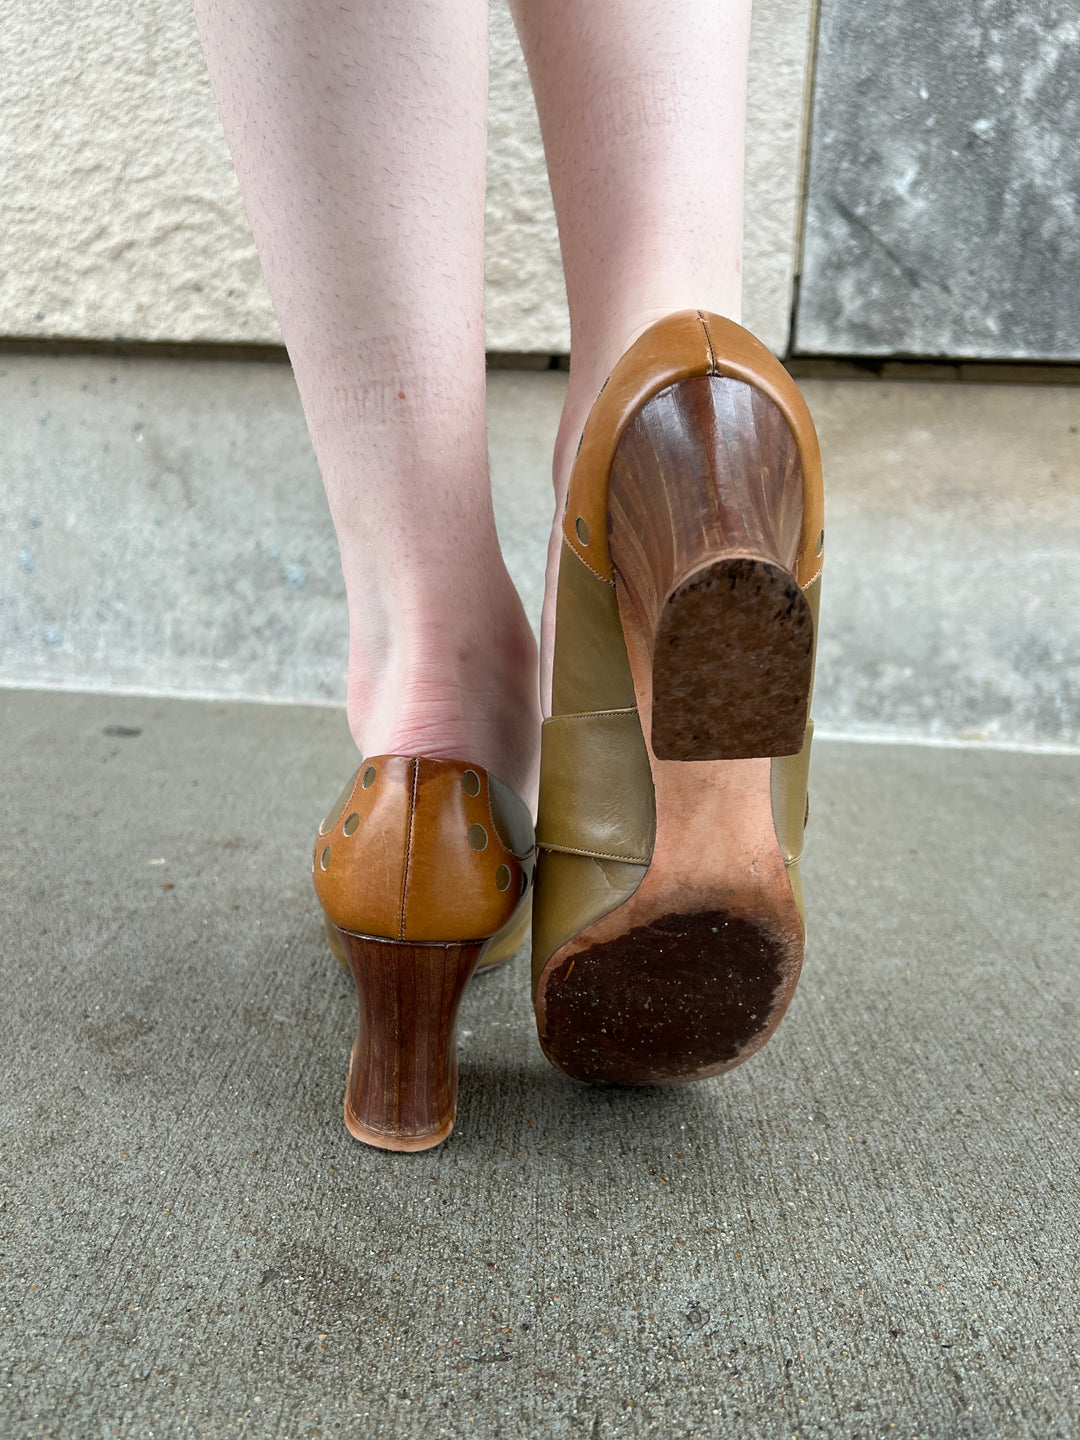 60s Brown/Tan Mary Jane Shoes, Fred Slatten for Carmo